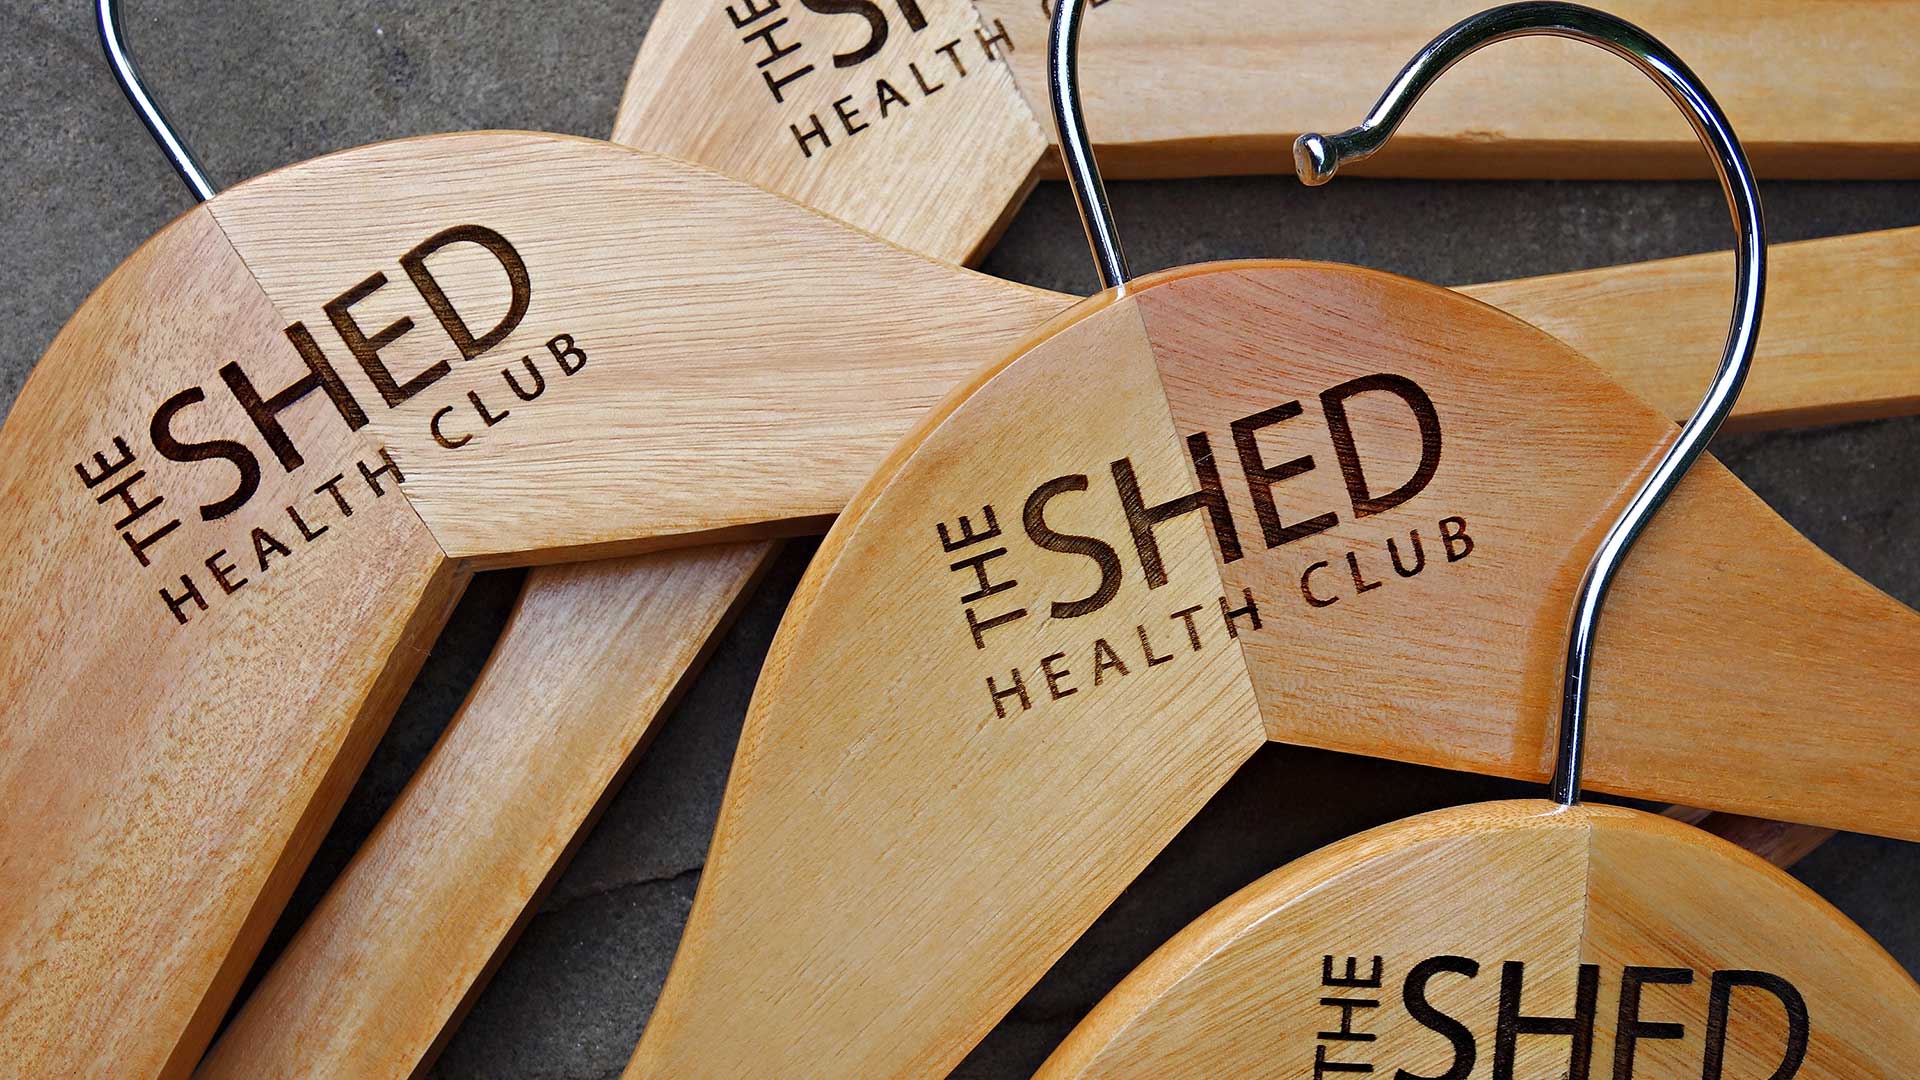 ENGRAVED WOODEN CLOTHERS HANGERS - BARS RESTAURANTS HEALTH CLUBS HOTELS - ETCH AND CUT LASER